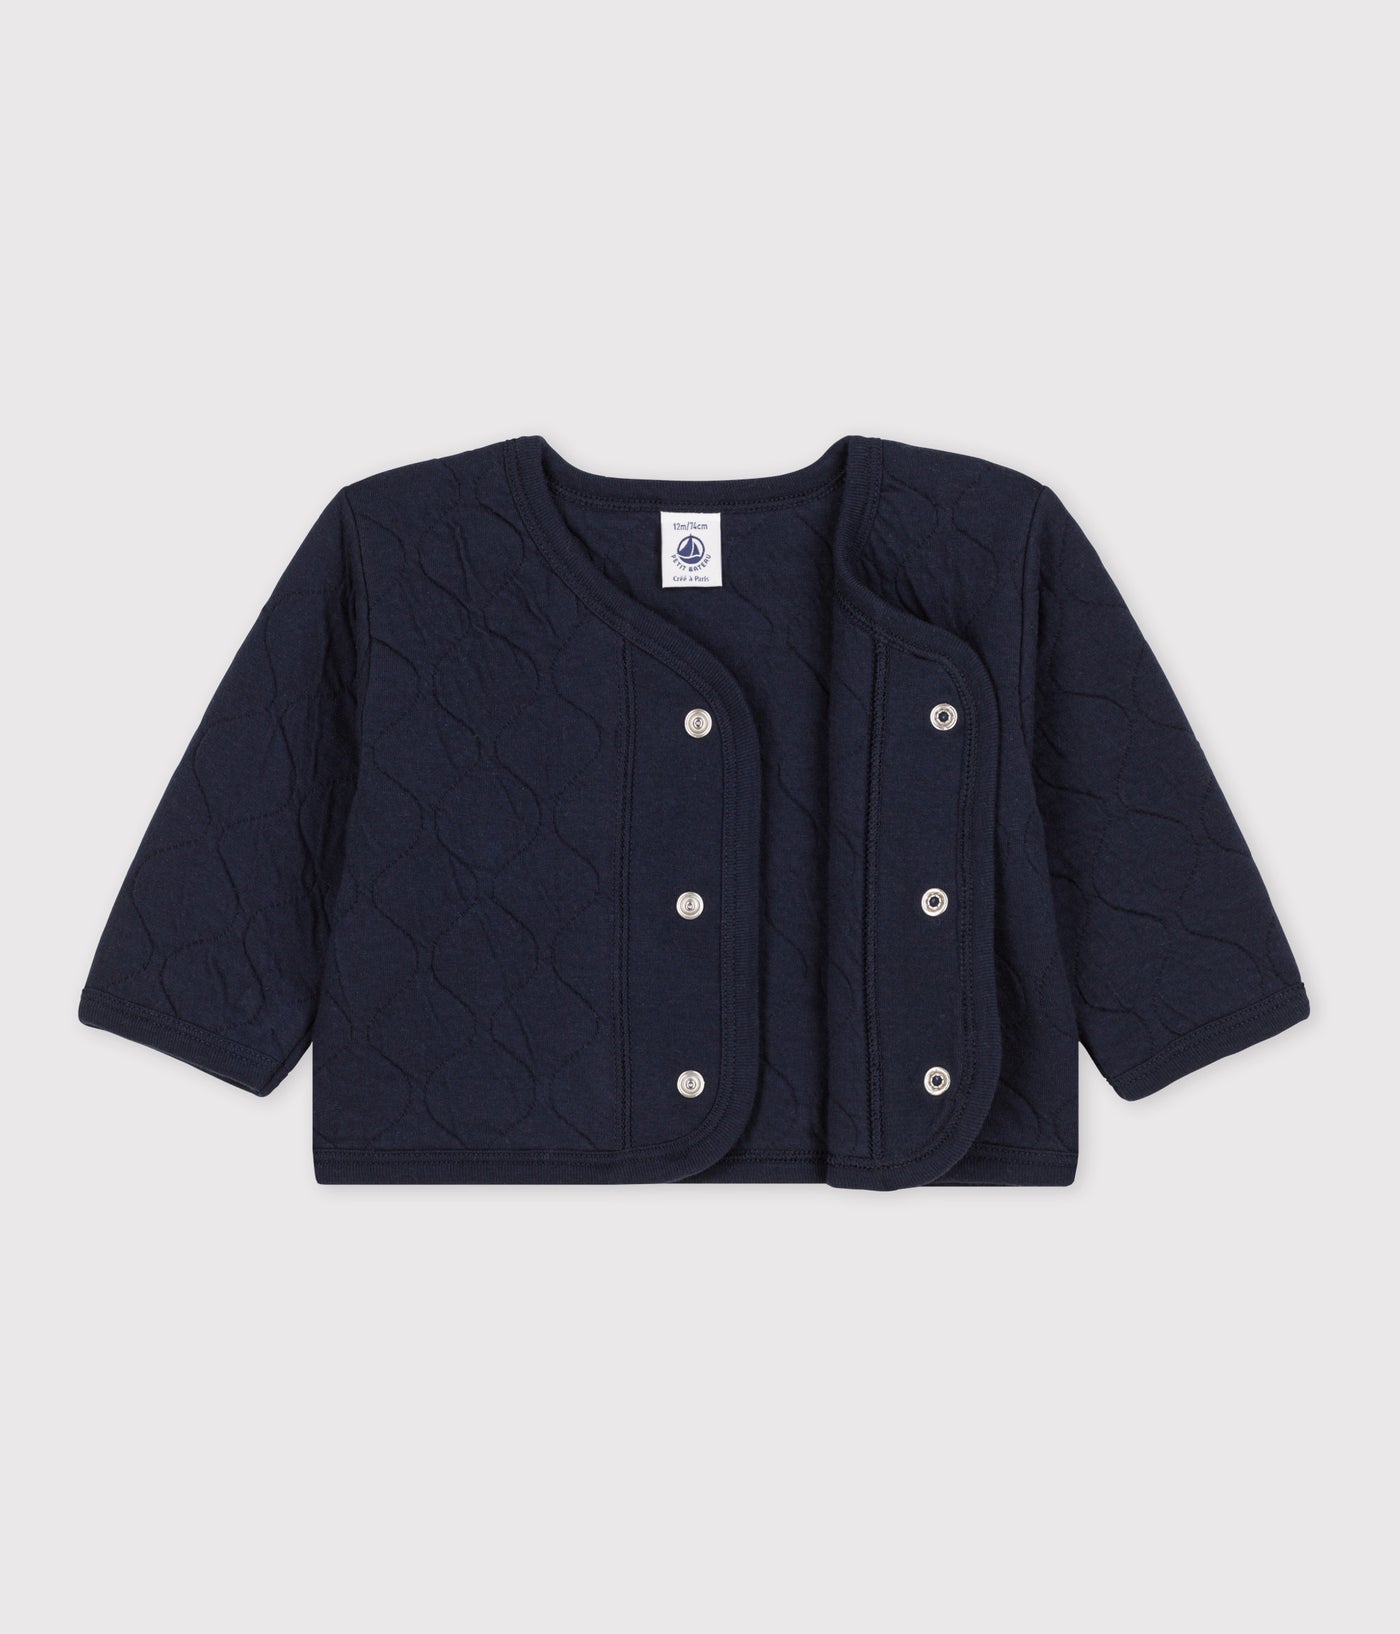 BABIES' QUILTED TUBE KNIT CARDIGAN